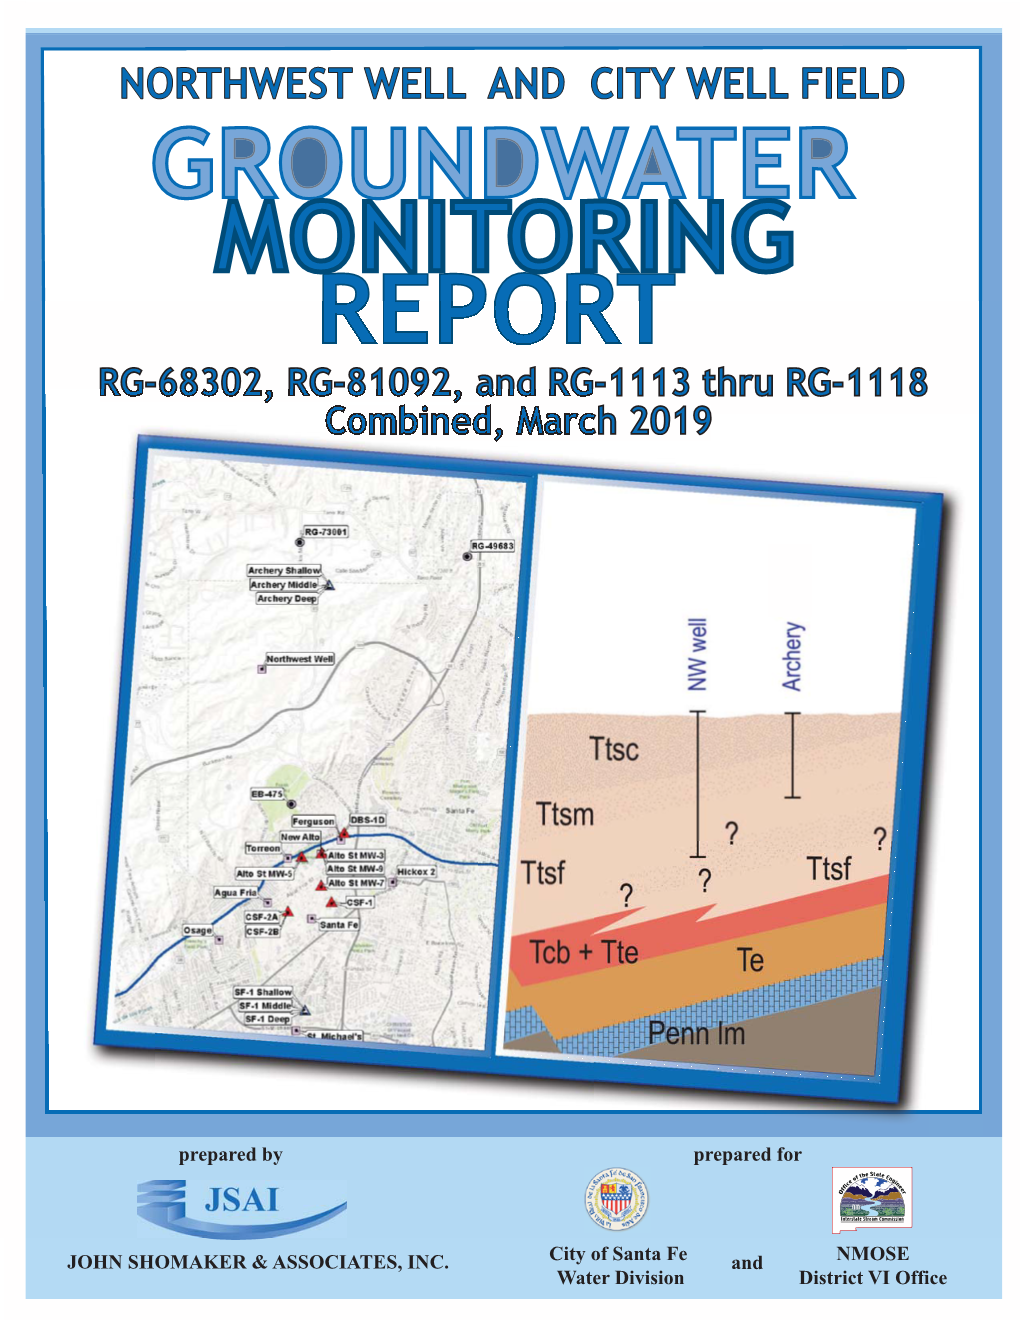 Northwest Well and City Well Field Groundwater Monitoring Report Rg-68302, Rg-81092, and Rg-1113 Thru Rg-1118 Combined March 2019